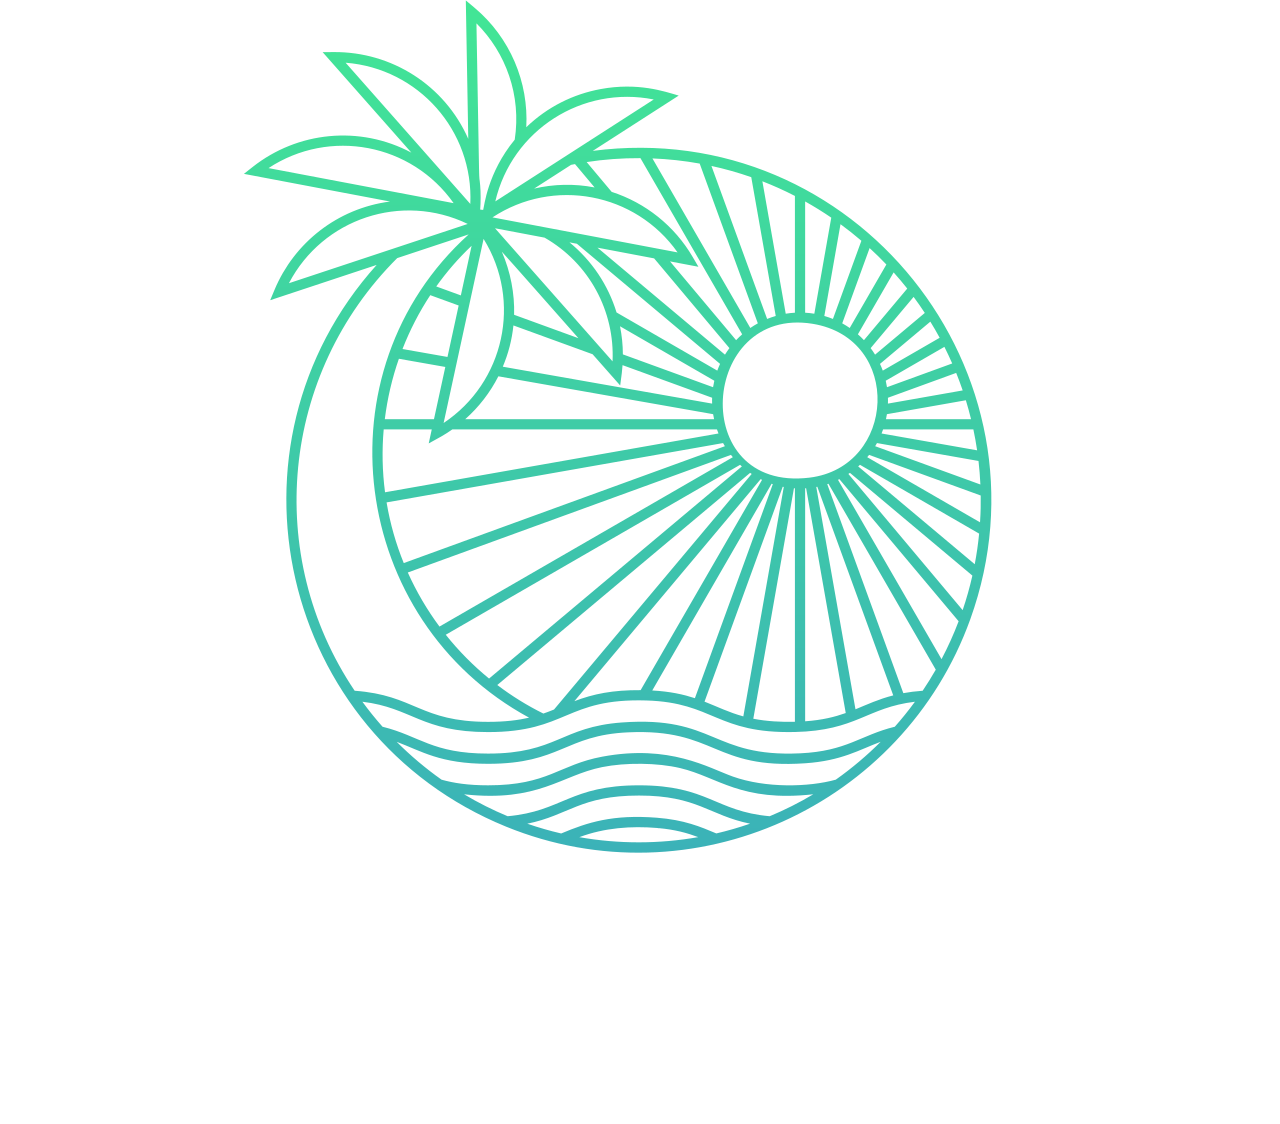 Beach Side Vacation Rentals, LLC.'s web page